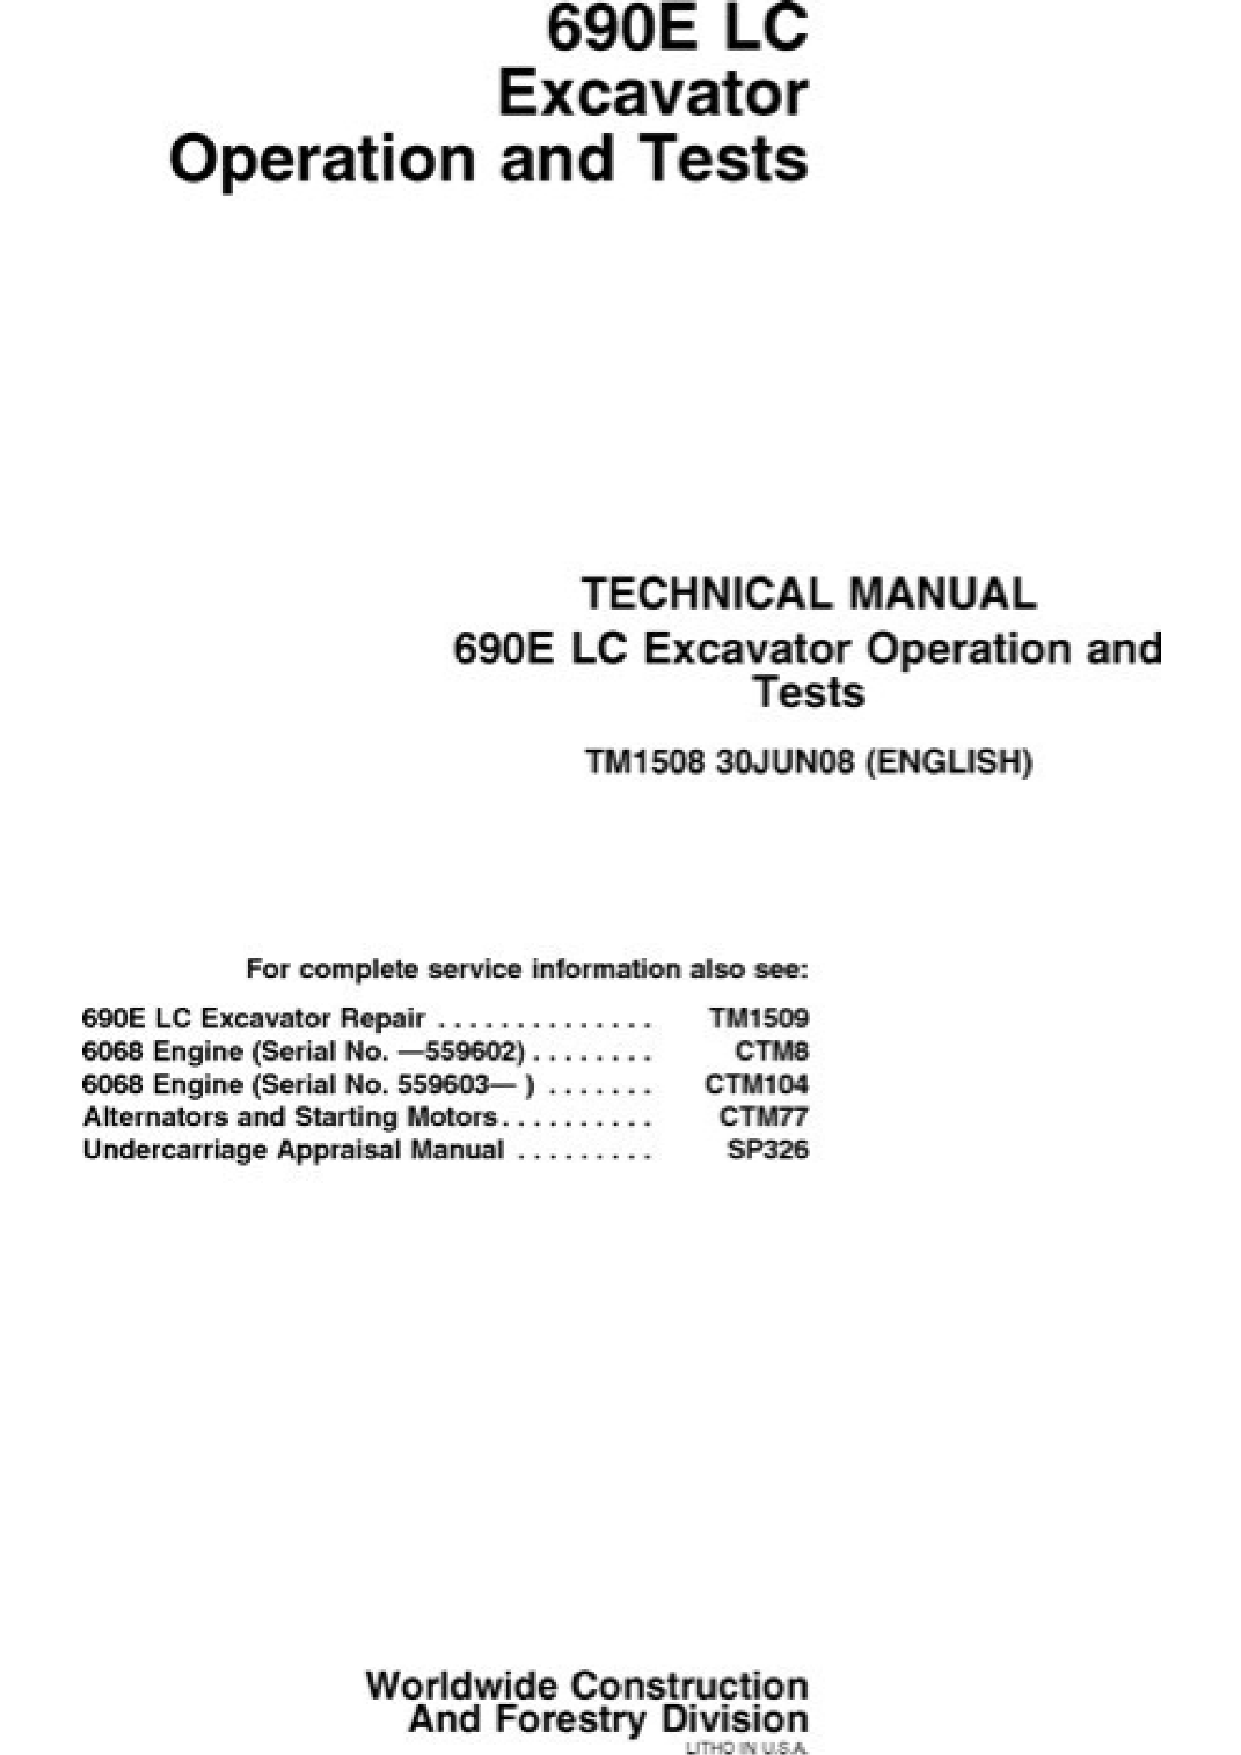 John Deere 690E LC excavator technical manual Preview image 1